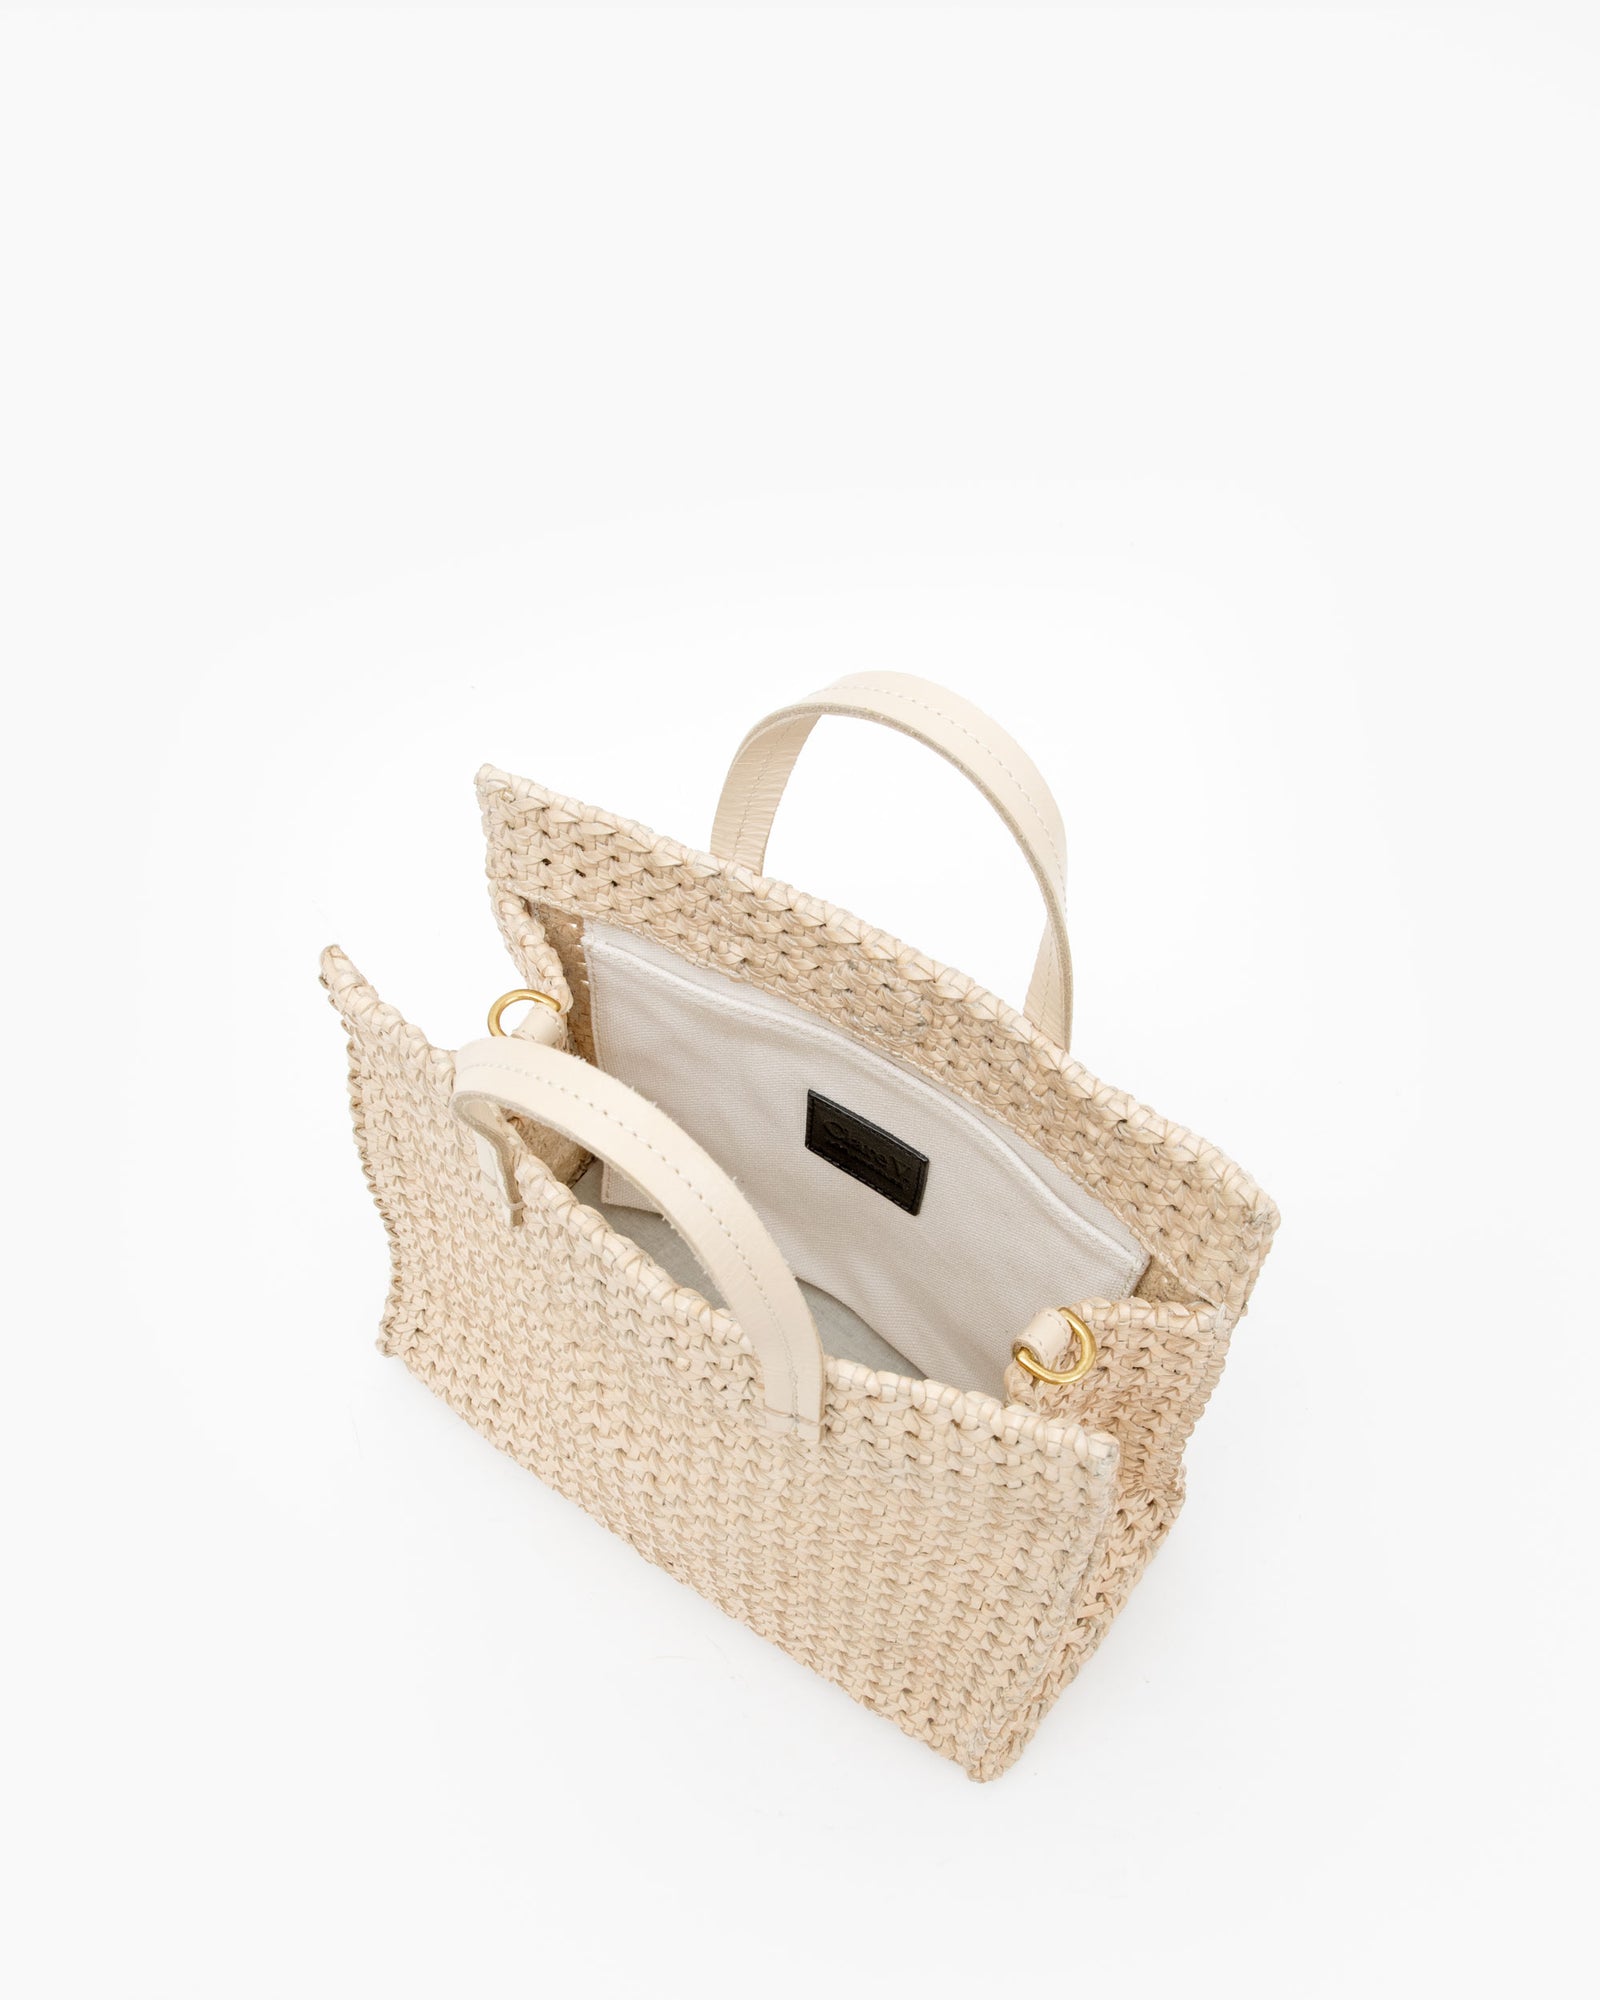 Clare V. Petit Summer Simple Tote - Size O/S